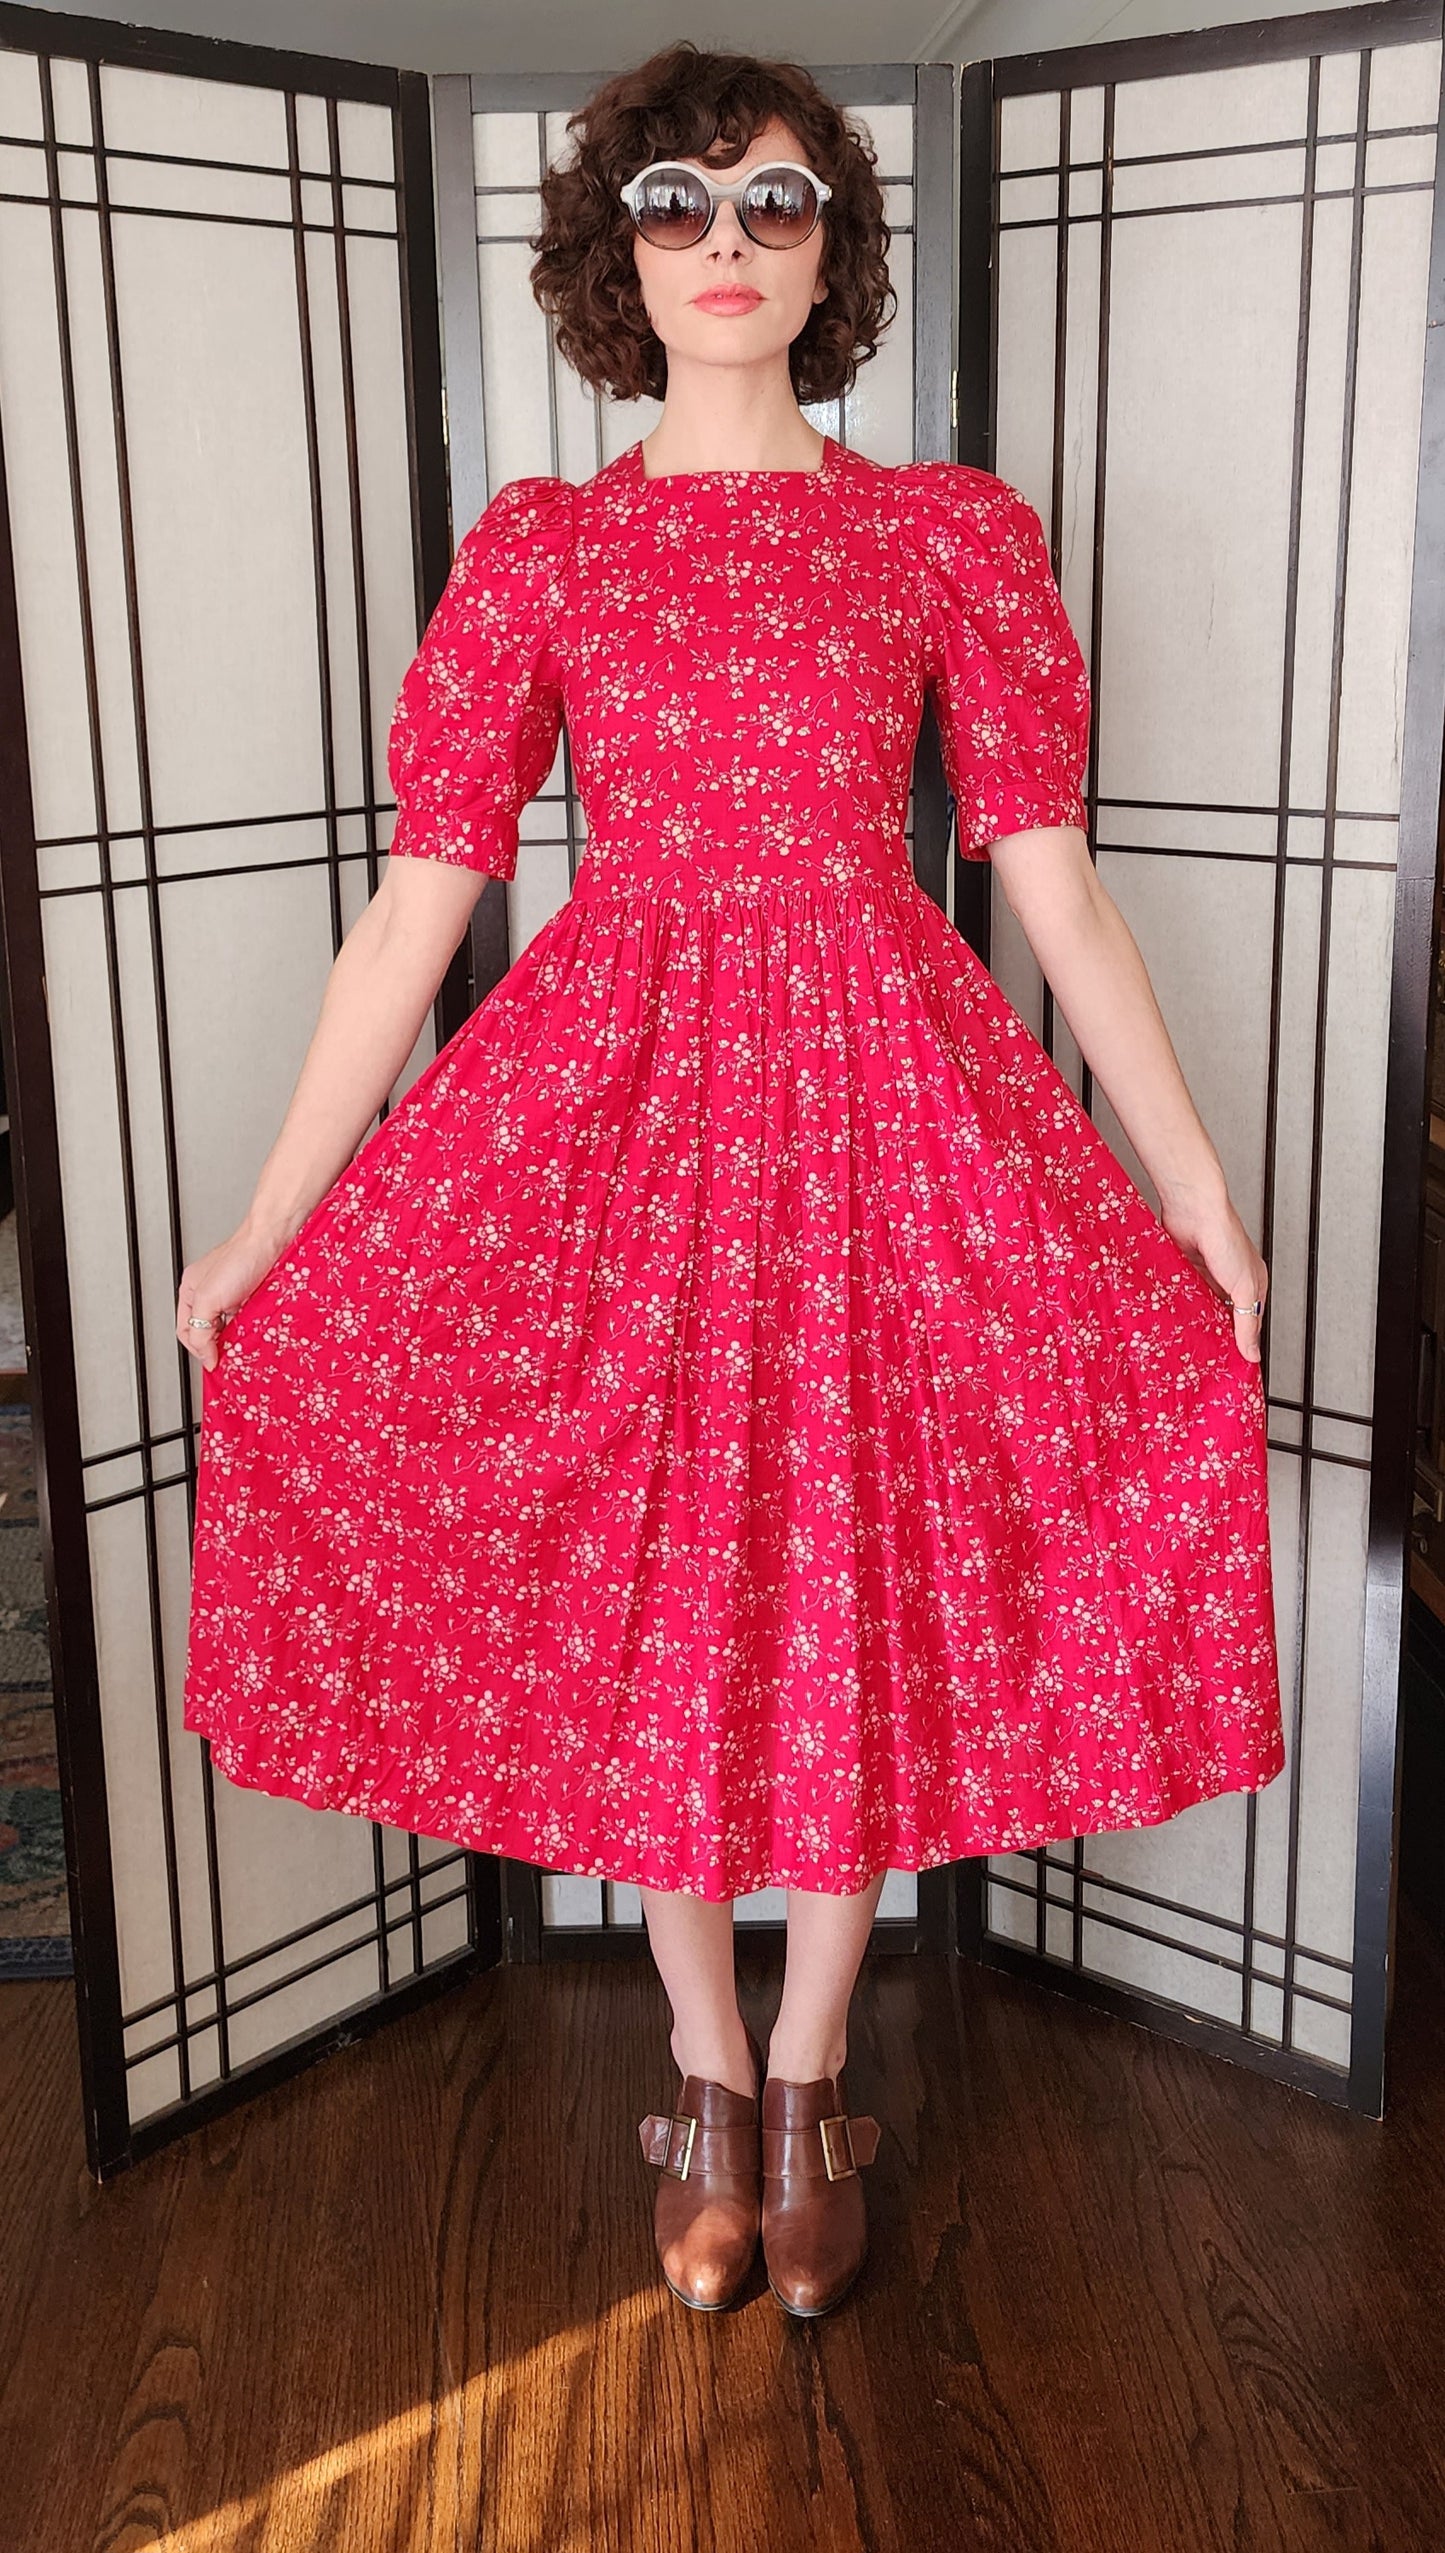 80s Laura Ashley Dress Red Cotton Floral Print w/Short Sleeves